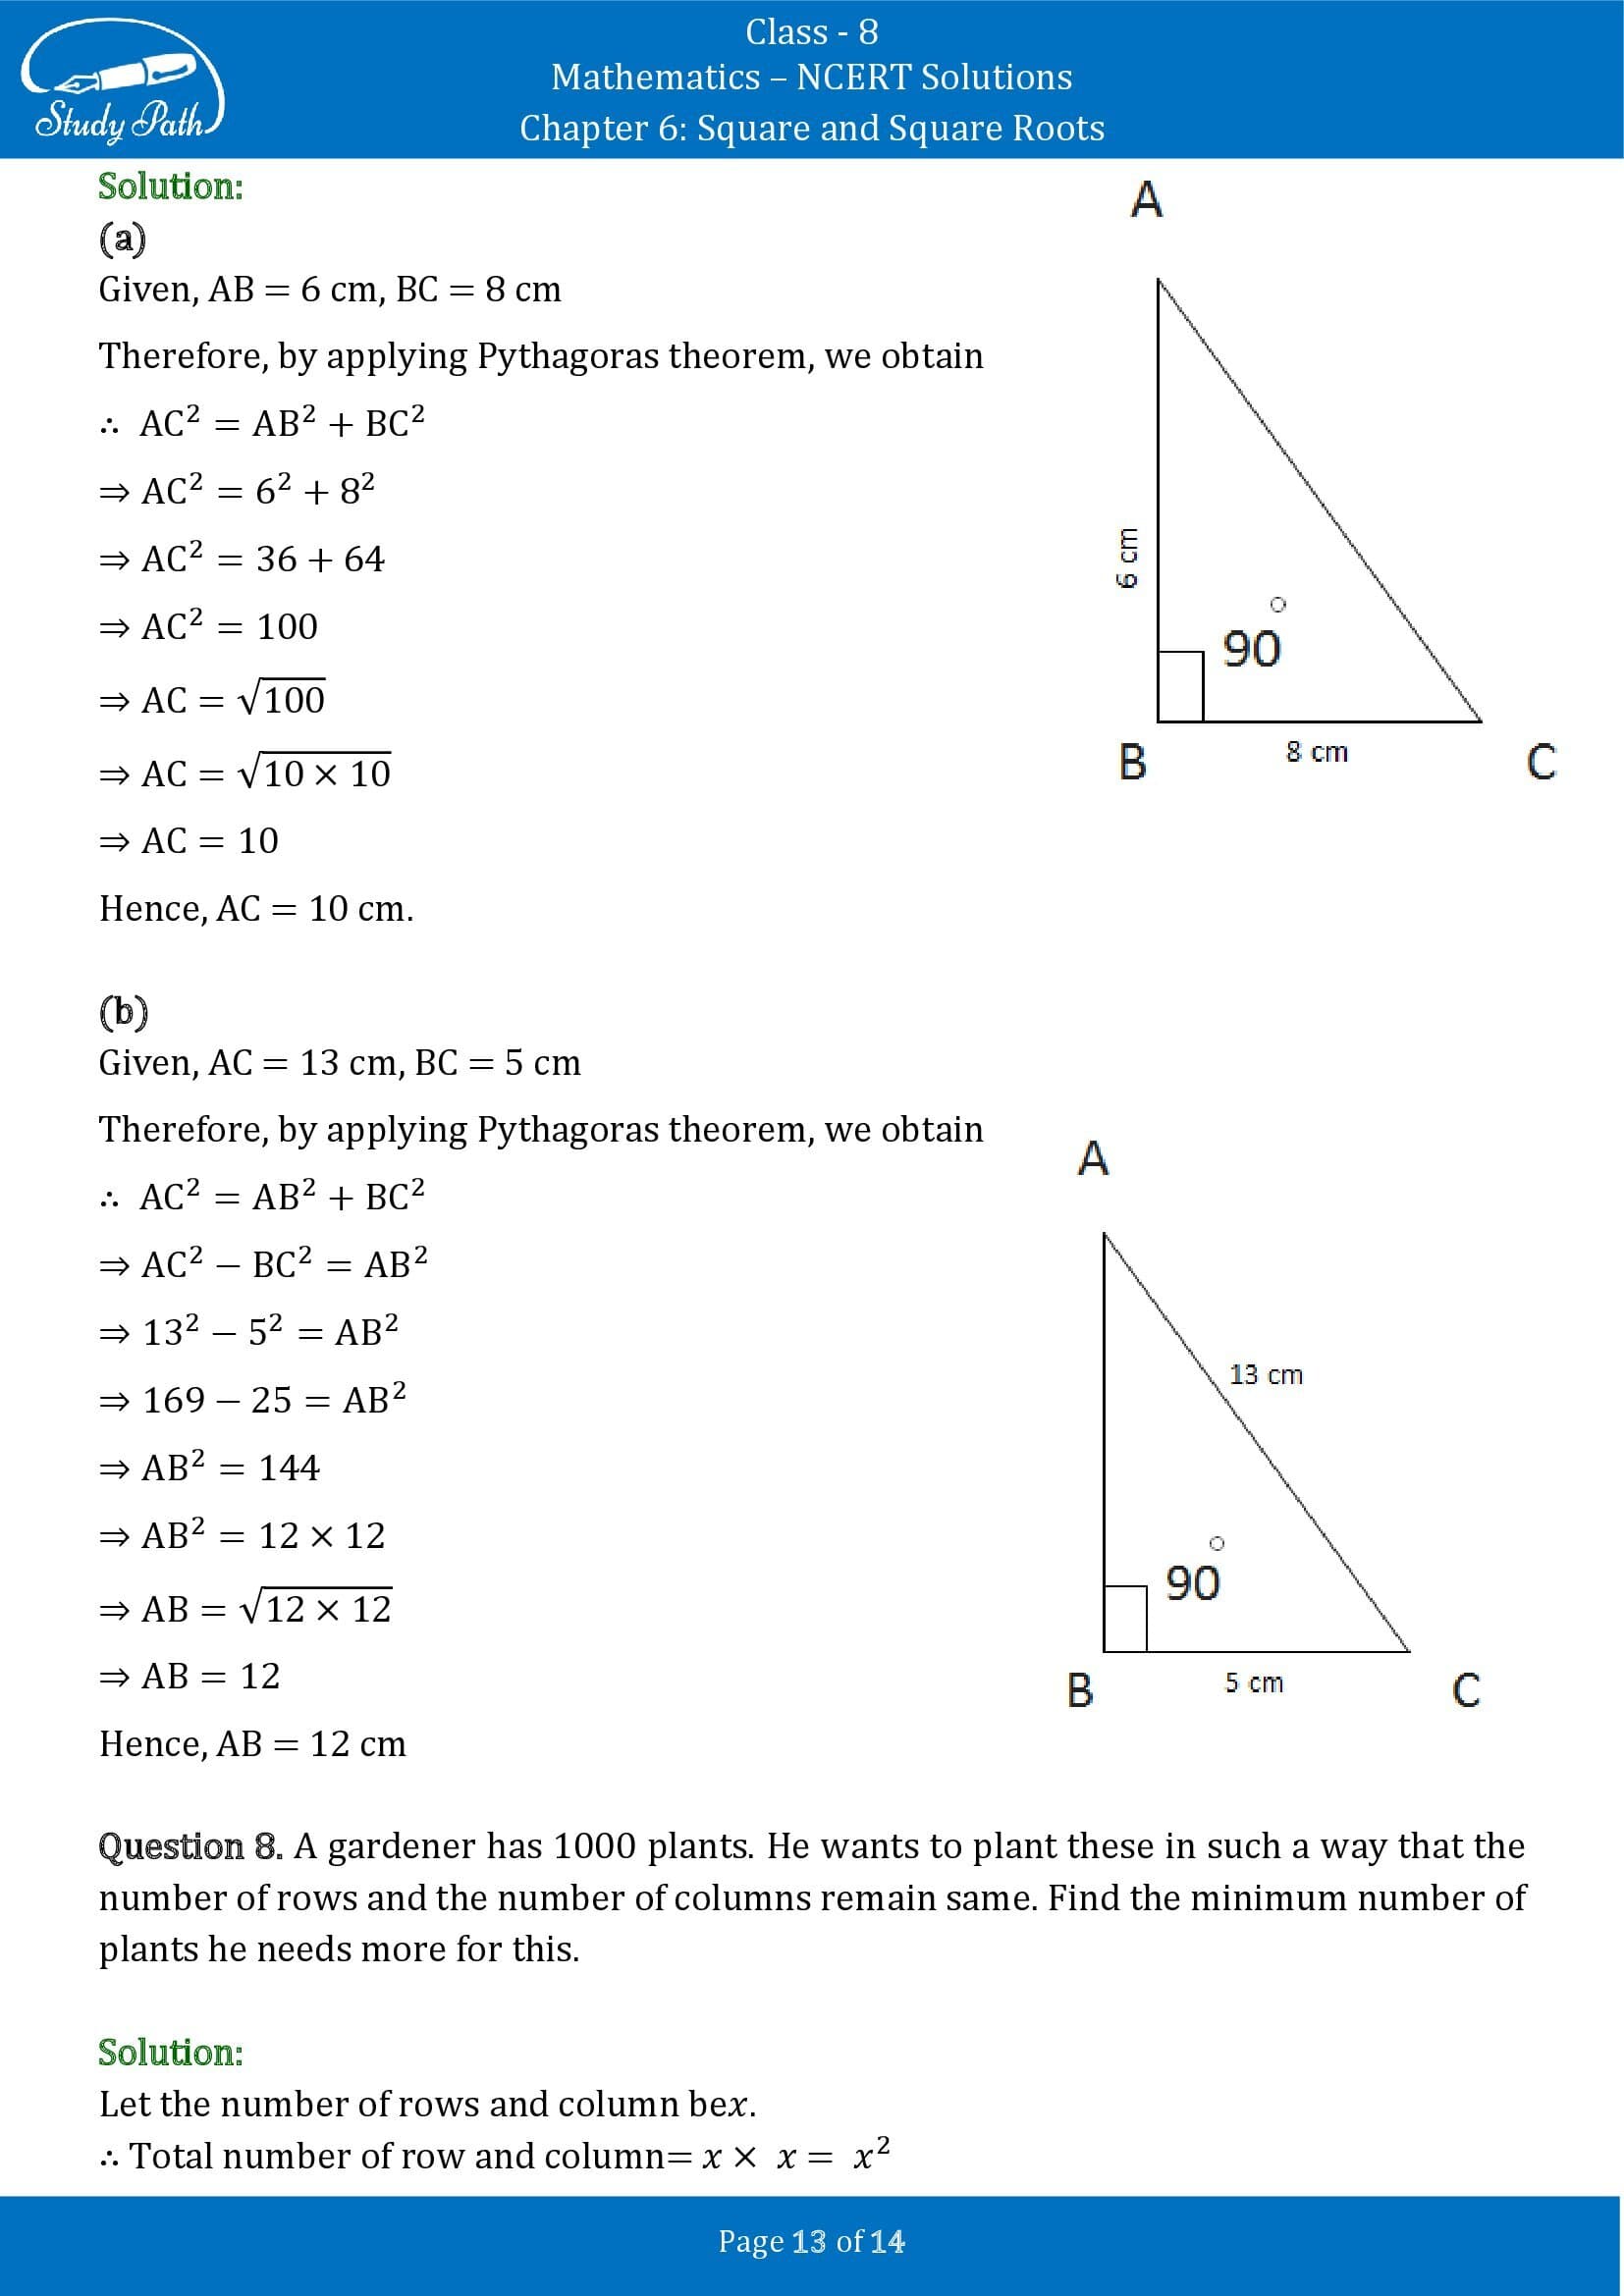 NCERT Solutions for Class 8 Maths Chapter 6 Square and Square Roots Exercise 6.4 00013